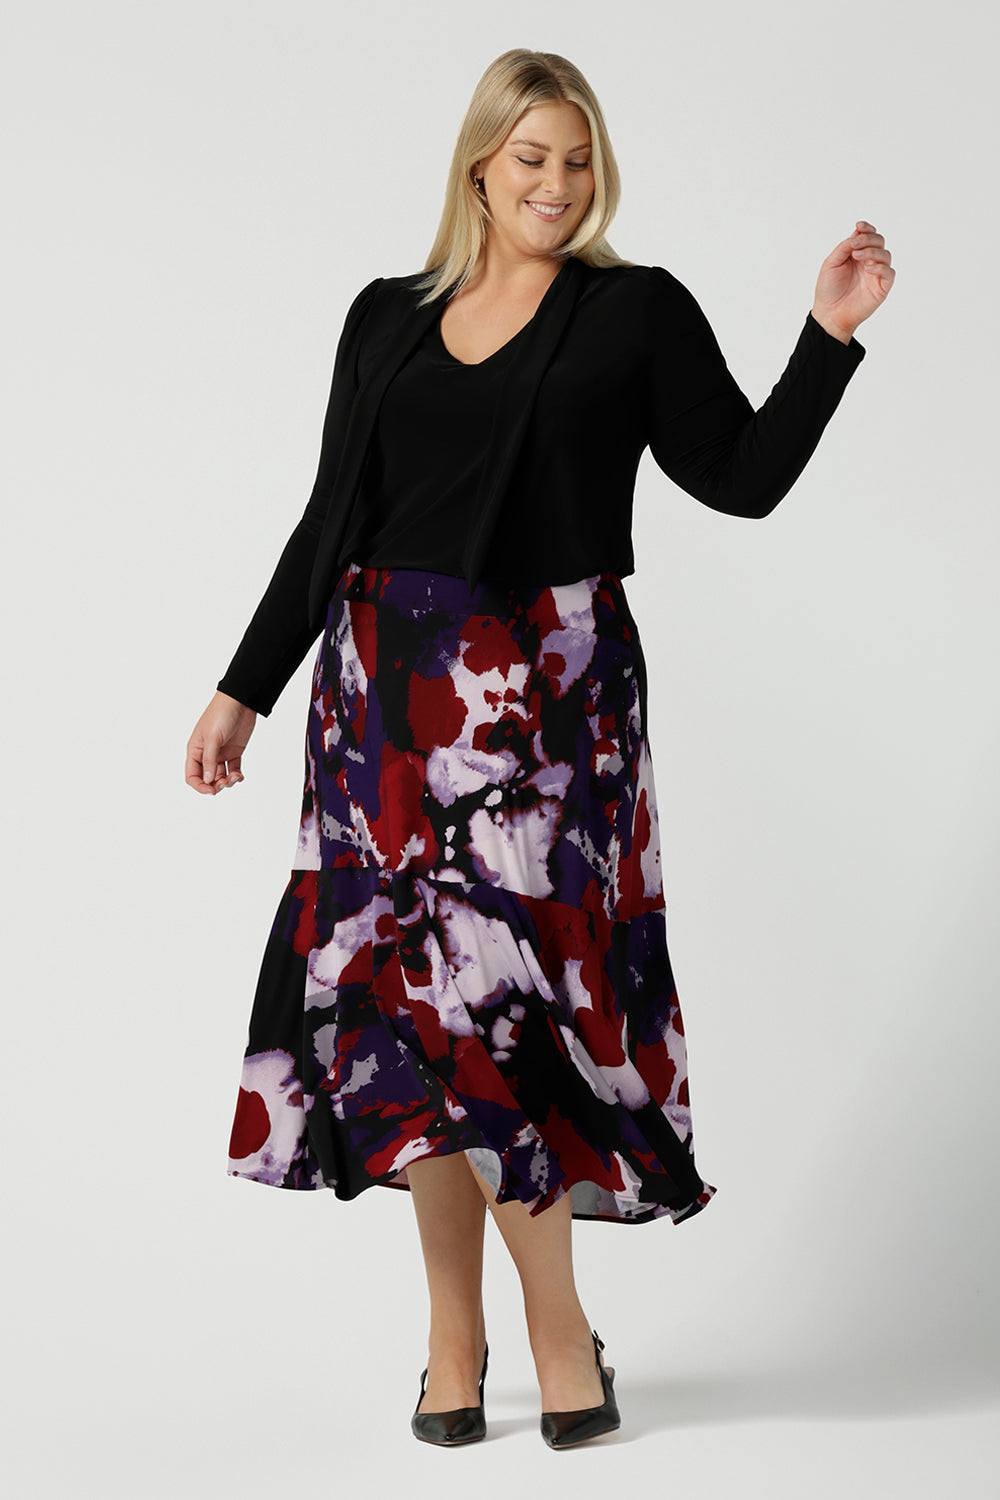 Size 18 woman wears the Berit Maxi skirt in the Fitzroy Print. Styled back with black pumps. Made in Australia for women size 8 - 24.